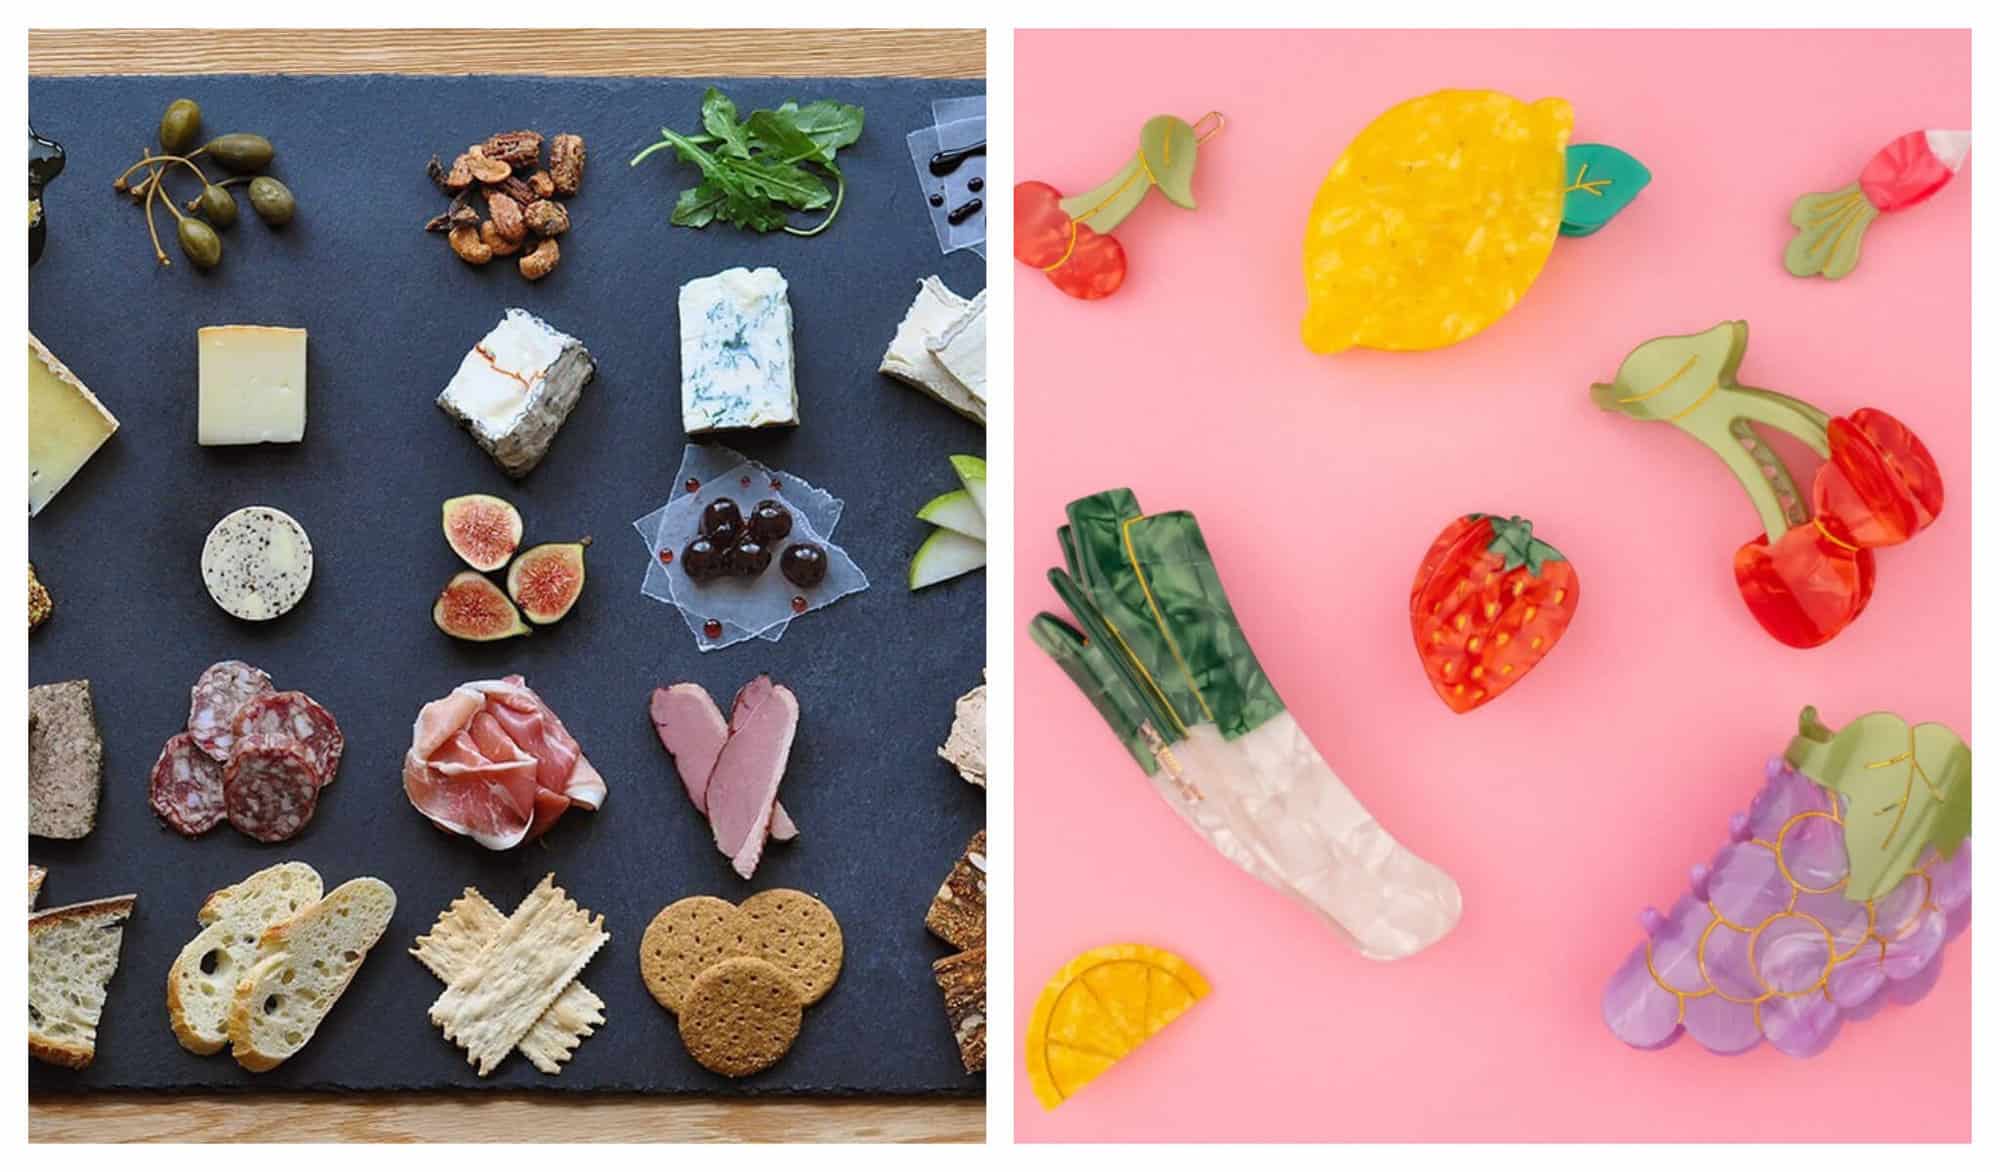 Left: A slate board full of charcuterie essentials like fig, cheese, ham, bread, and olives. Right: A lot of food-themed hair clips in a variety of colors.